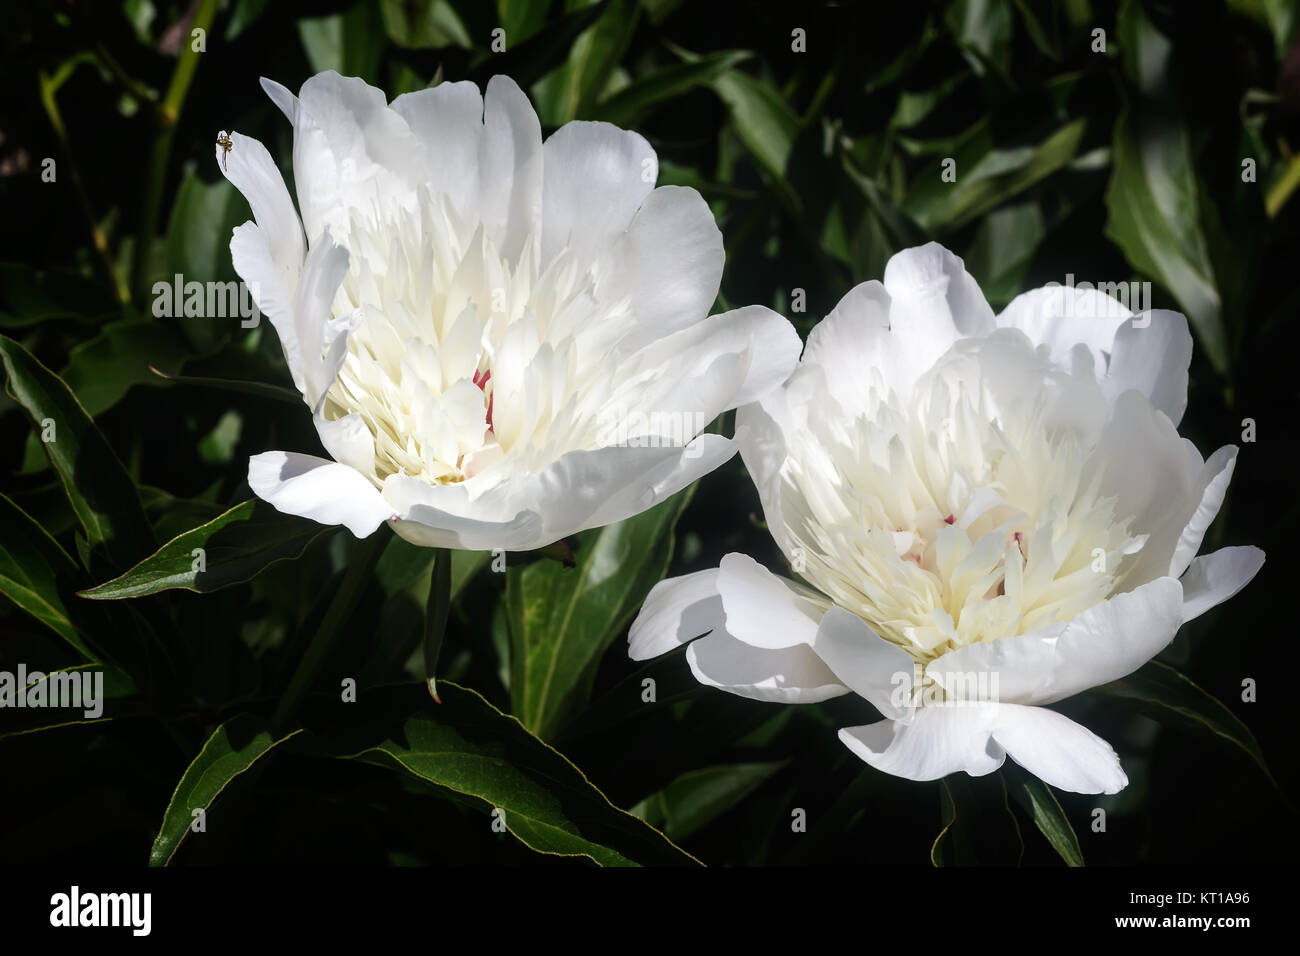 Blossoming white peony among green leaves Stock Photo